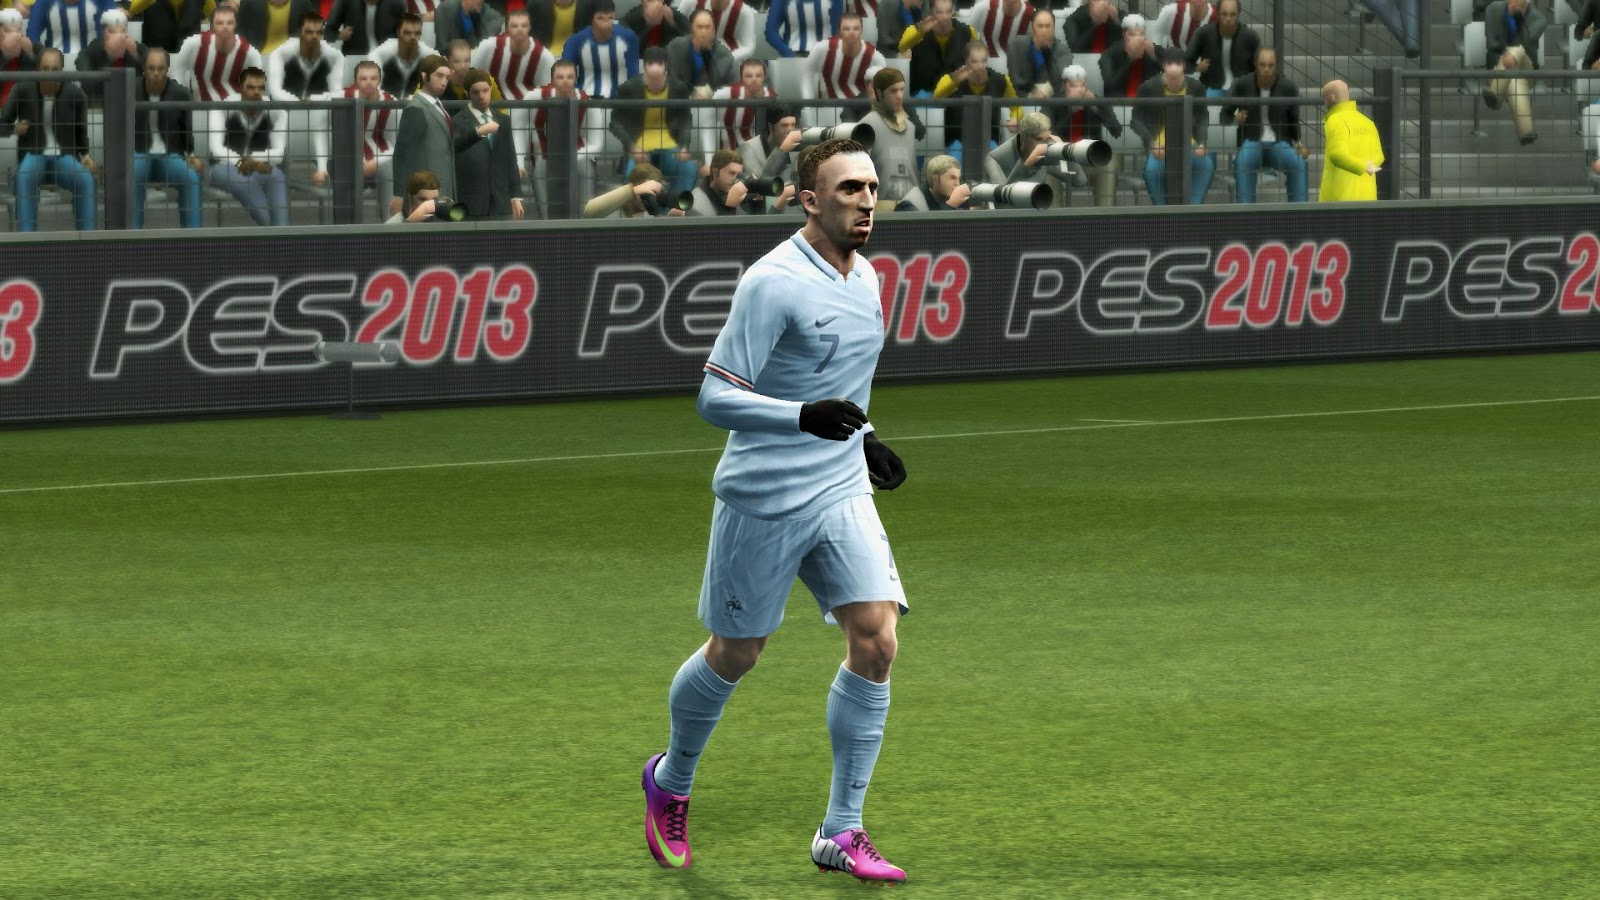 Pes 2013 Transfer Patch Pc Free Download